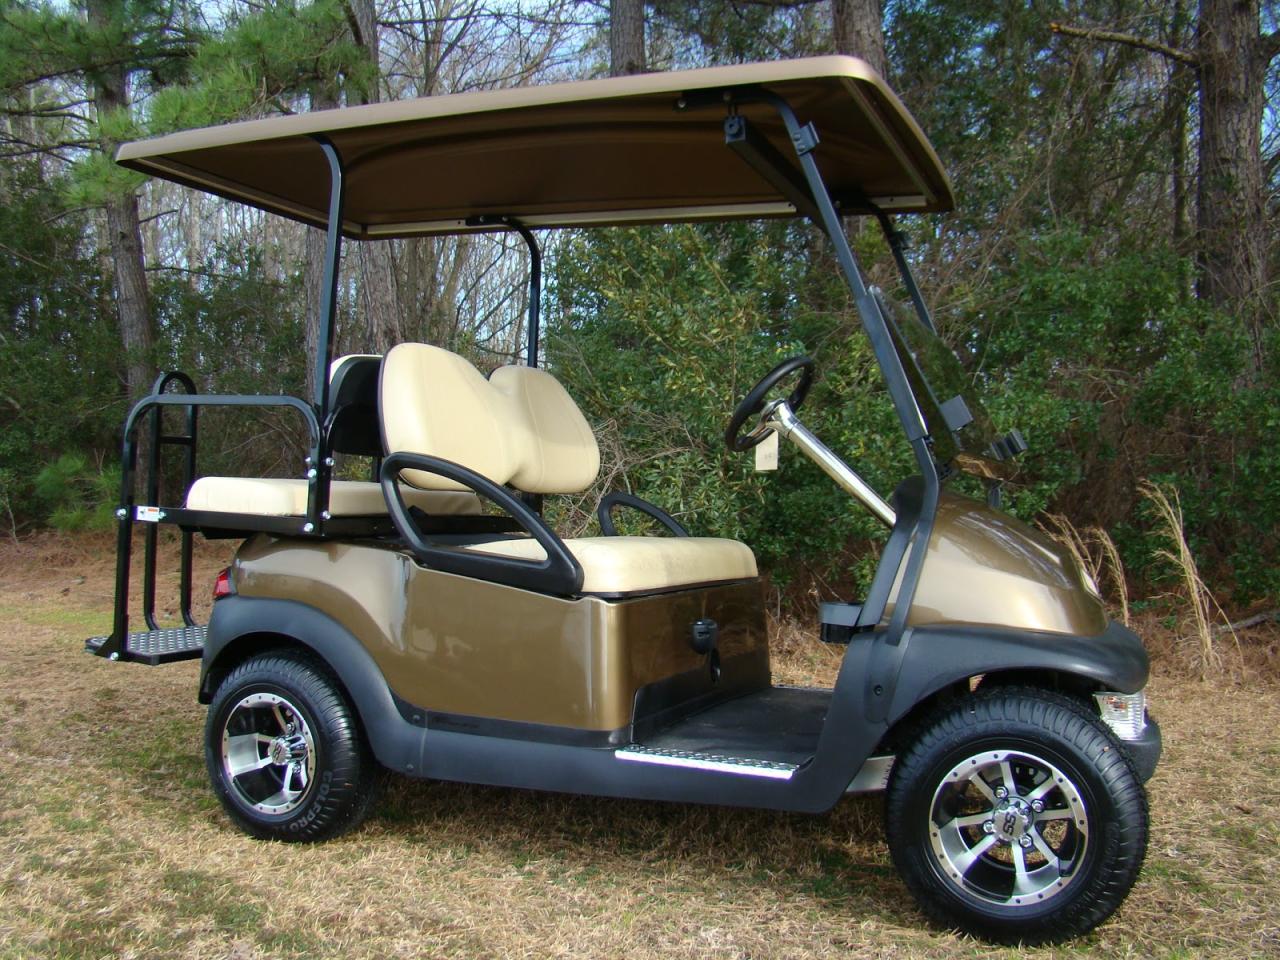 Find Your Dream Cart: Used Golf Carts for Sale by Owner in Washington and Idaho